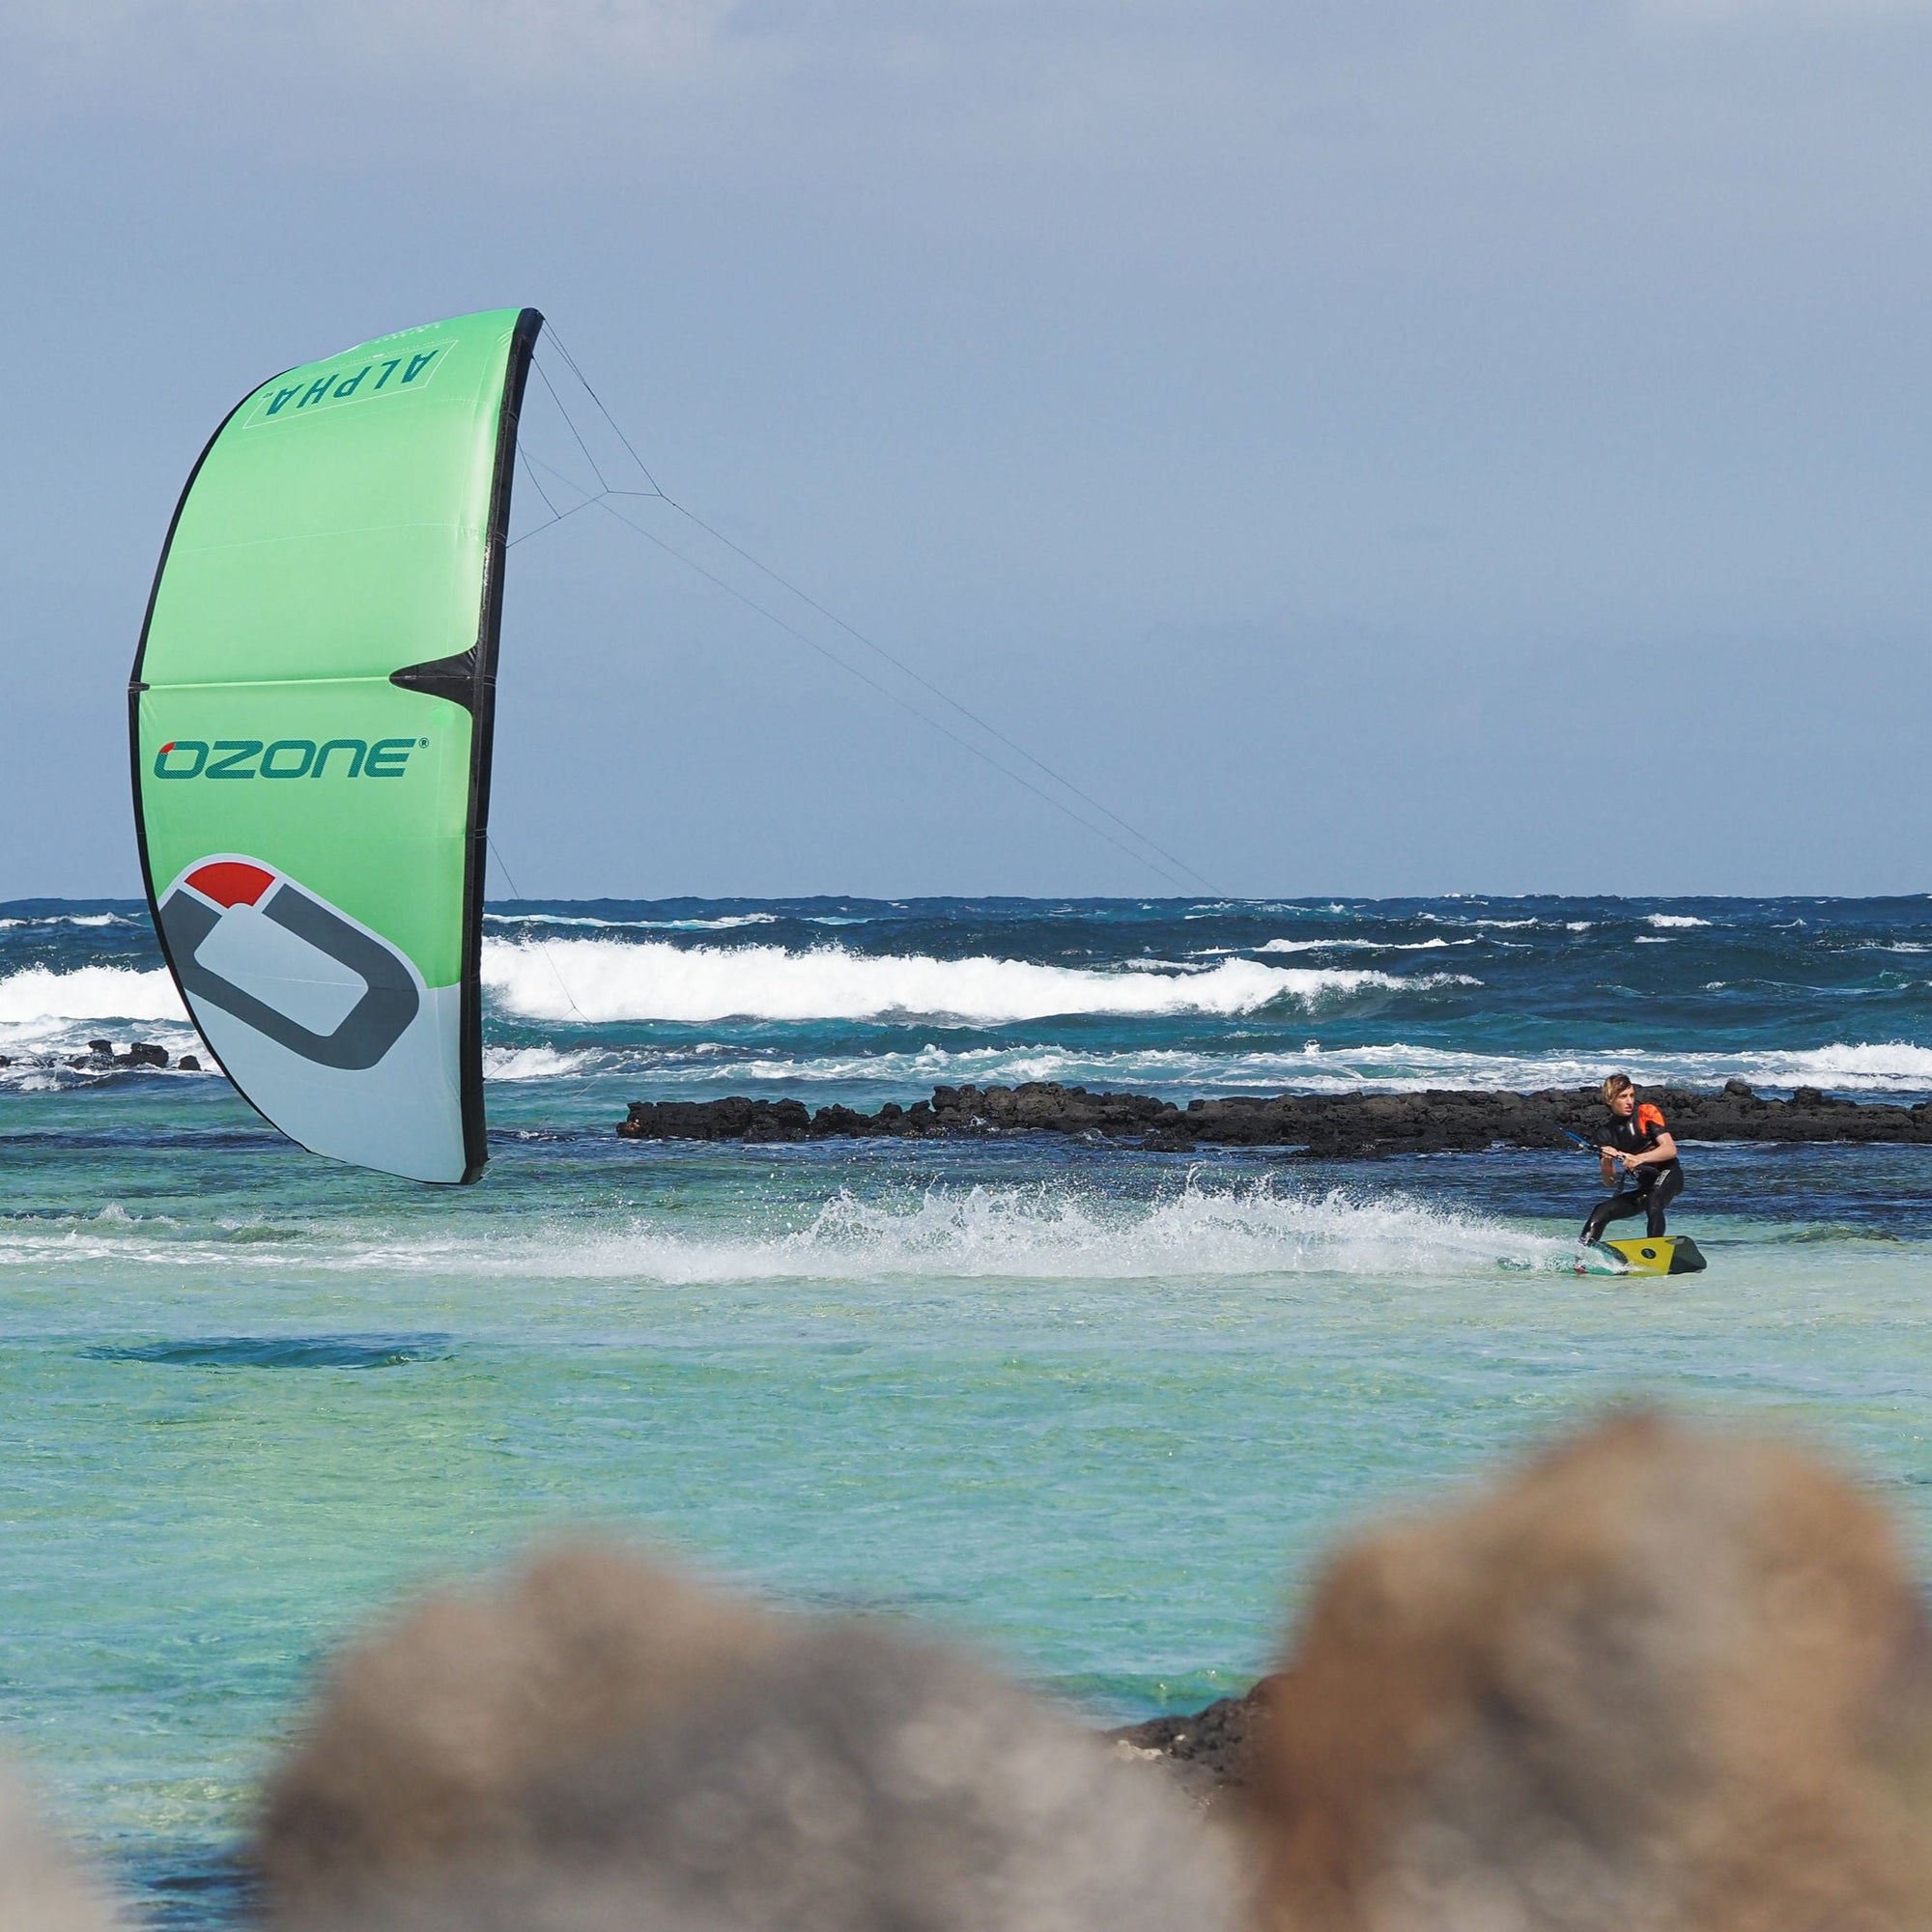 Green Alpha V2 flying low in turquoise water